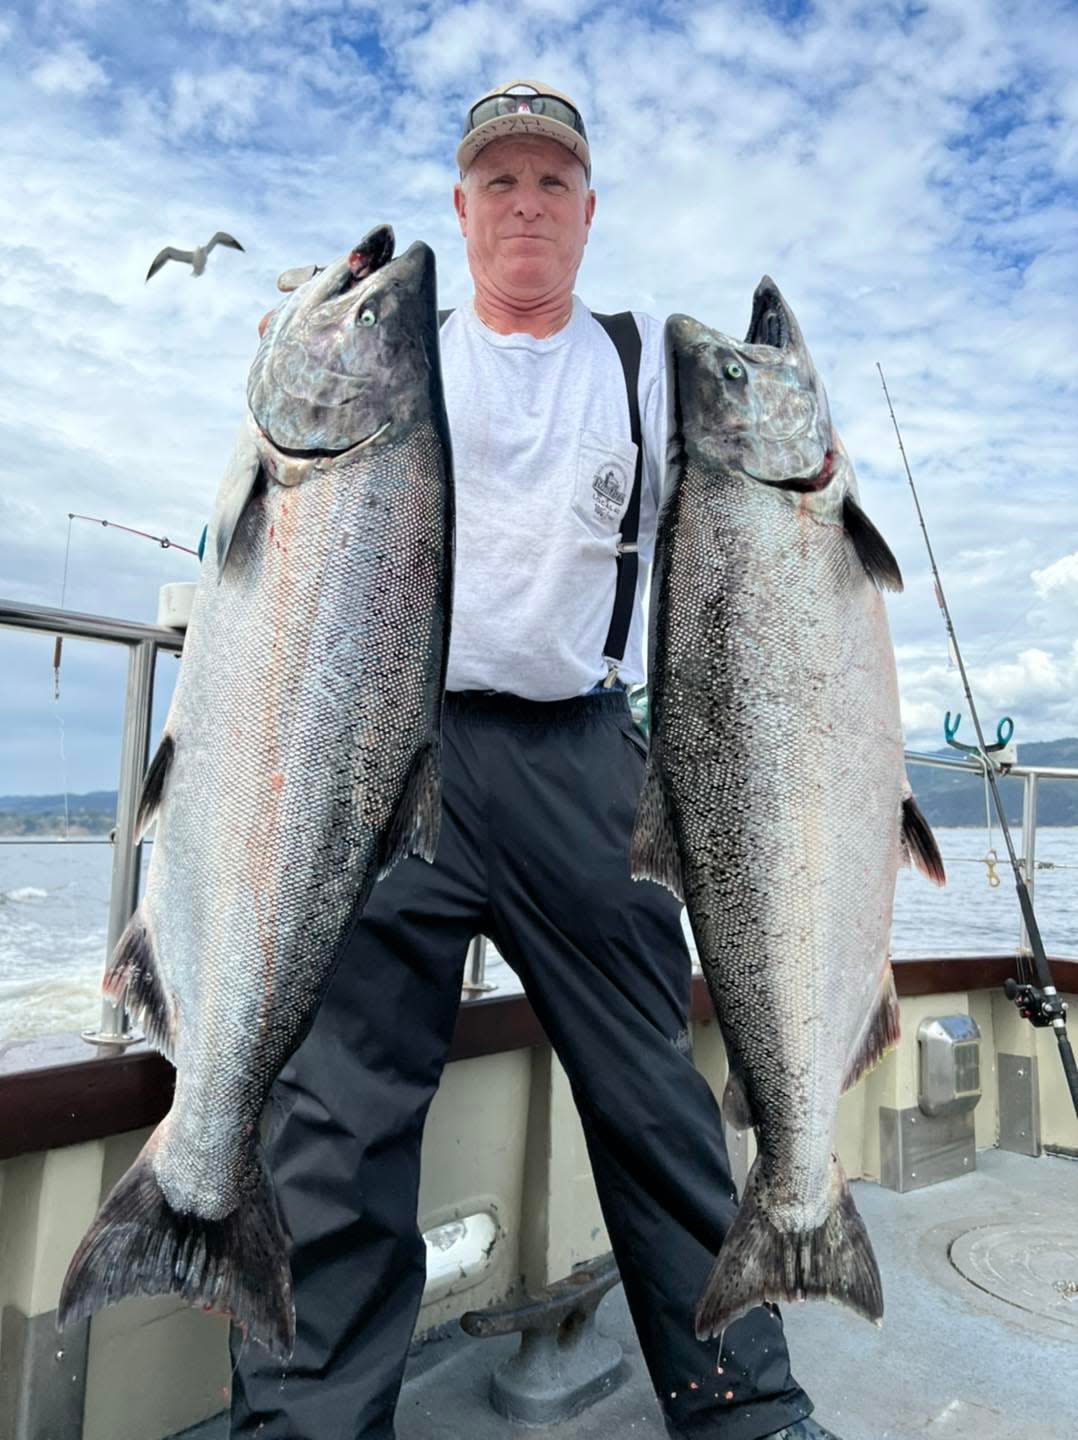 While lingcod and rockfish have provided the most consistent fishing outside of the Golden Gate lately, huge king salmon like these taken aboard the Lovely Martha in San Francisco have been caught as the ocean salmon season nears its end on Oct. 31.